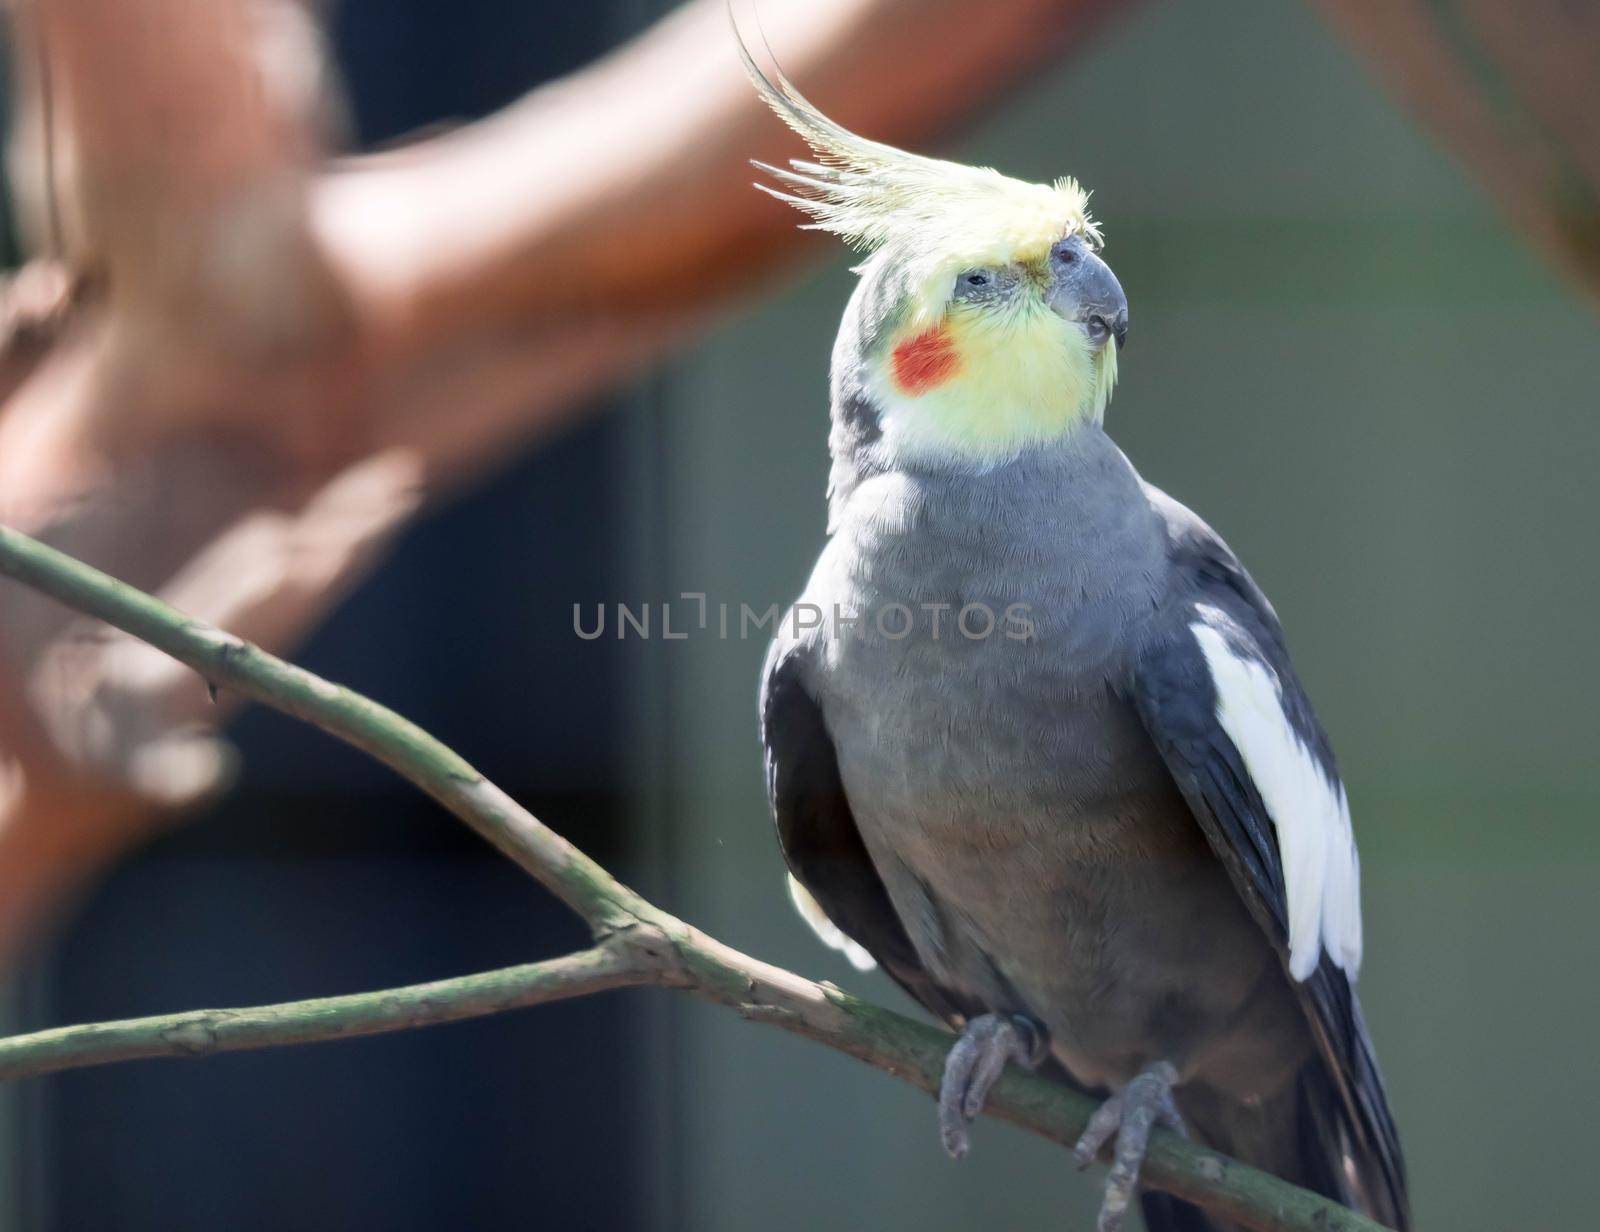 A Closeup of a Cockatiel (Nymphicus hollandicus) with blurry background